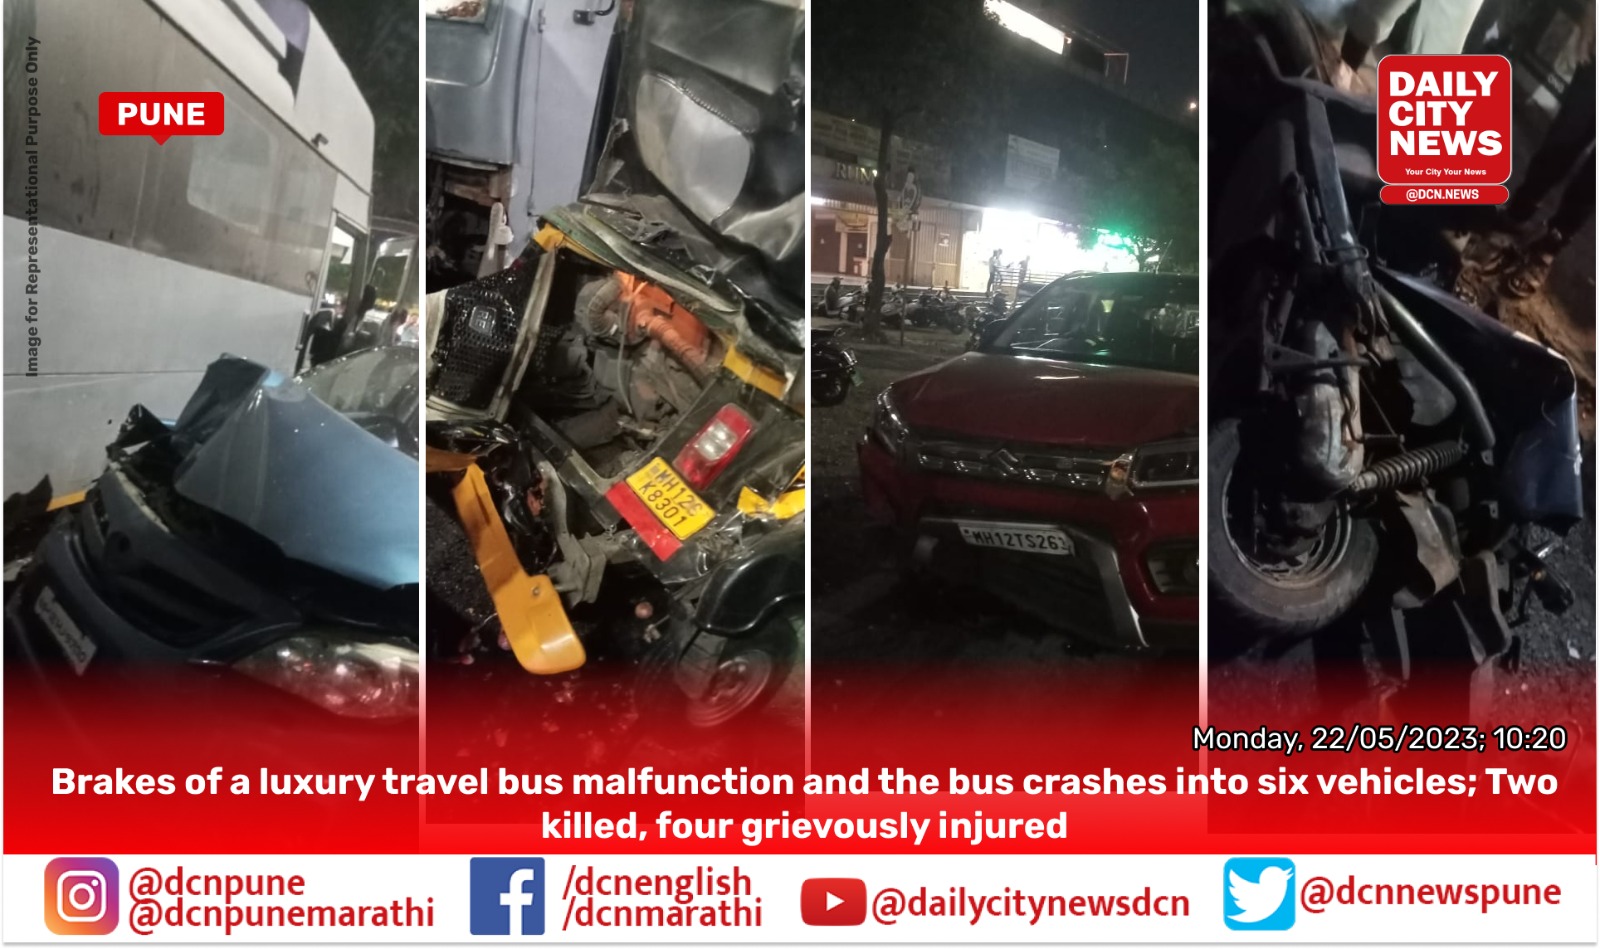 Brakes of a luxury travel bus malfunction and the bus crashes into six vehicles; Two killed, four grievously injured